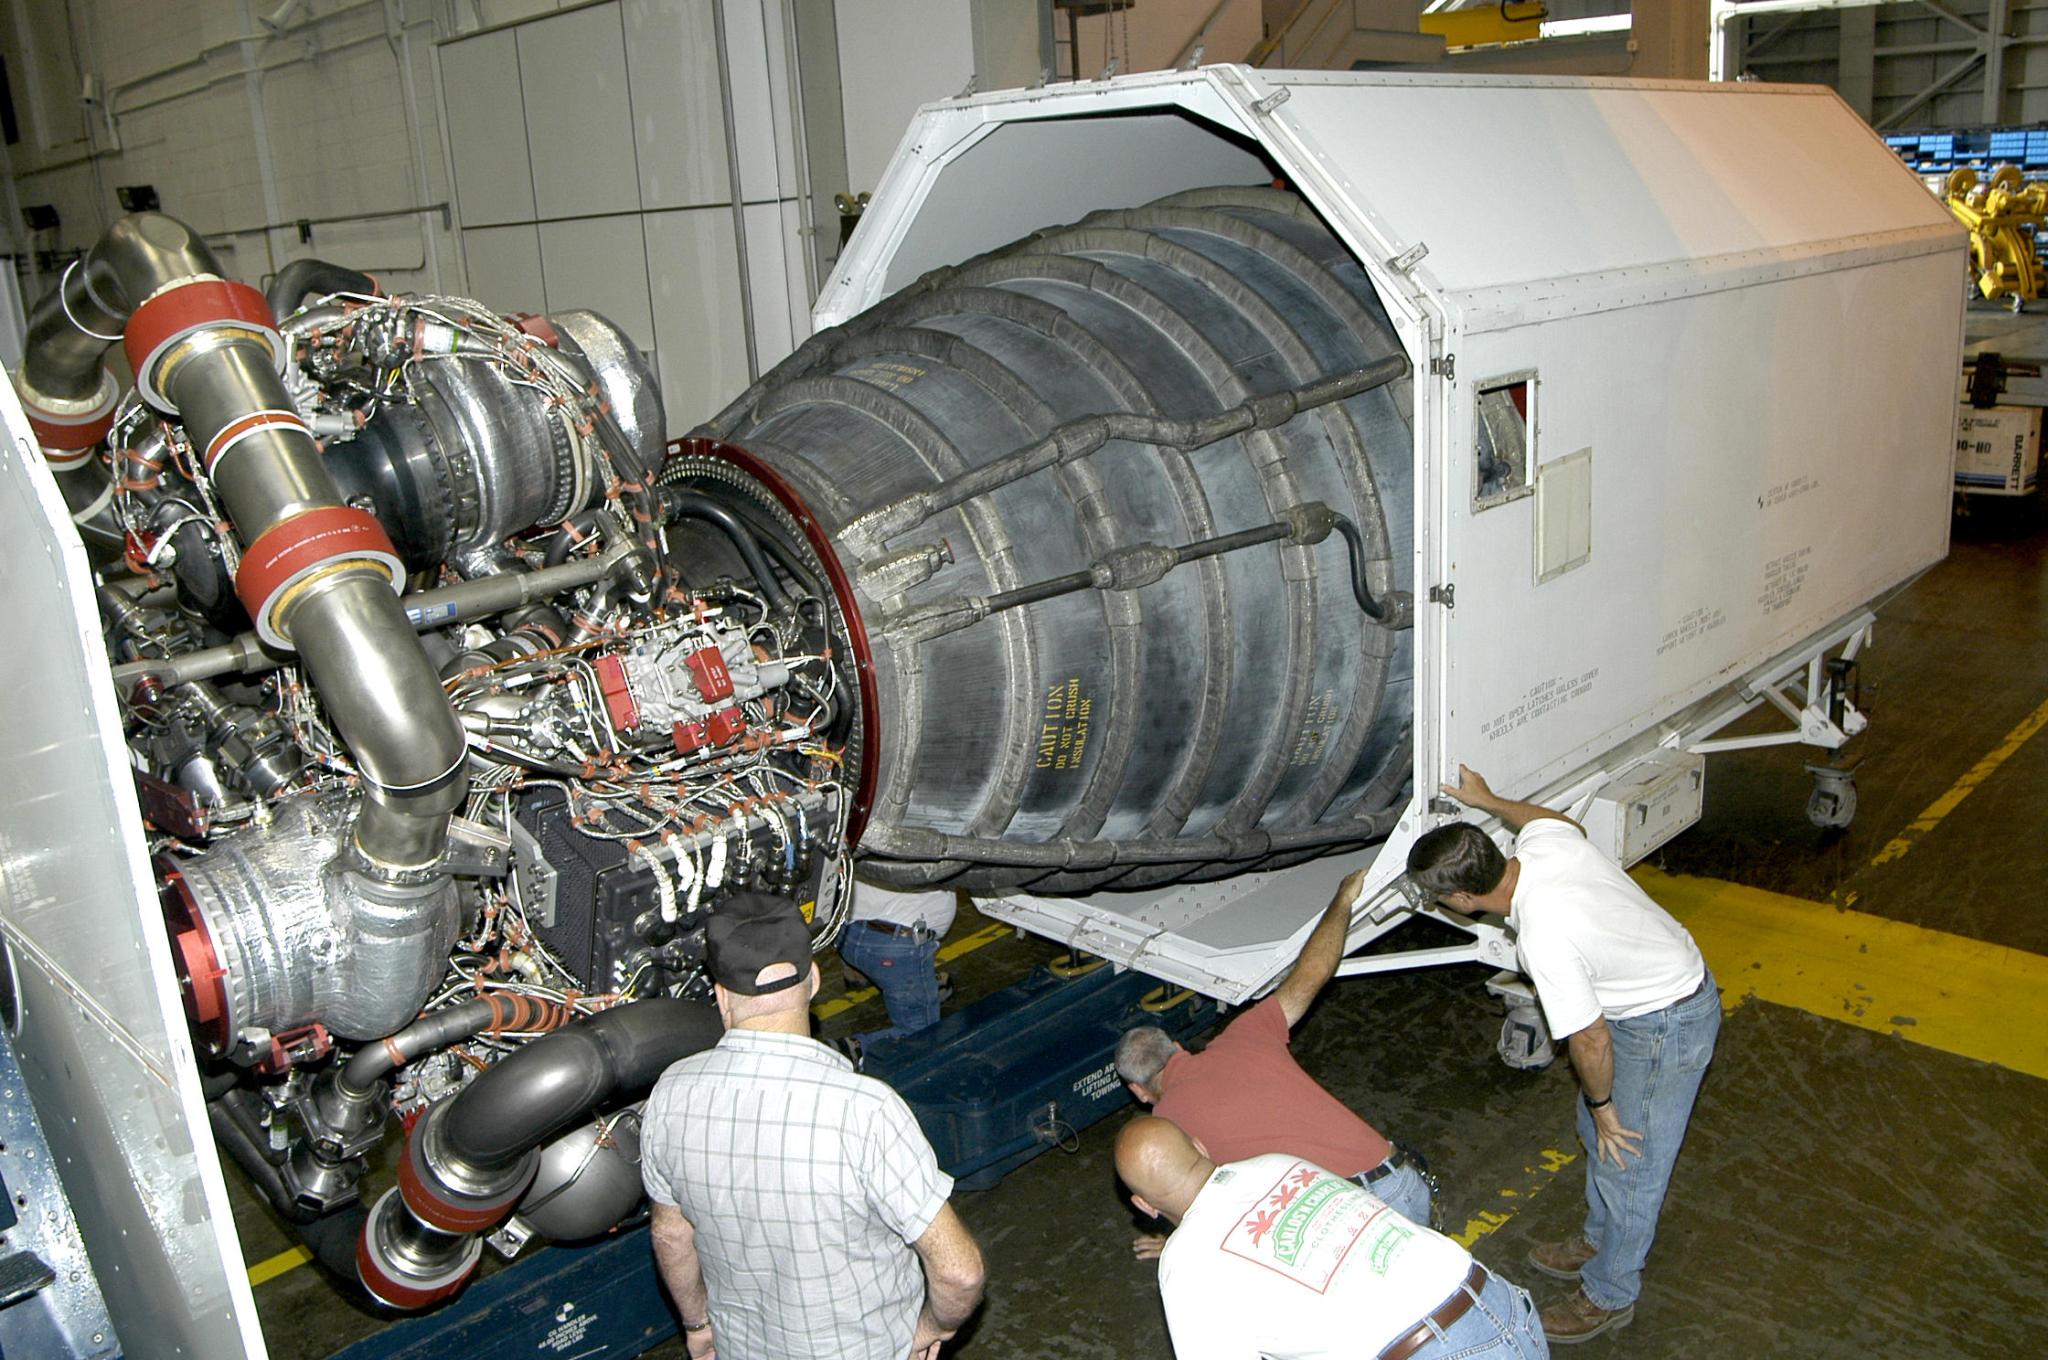 Stennis Space Center employees prepared a space shuttle main engine for transport to Kennedy Space Center on Oct. 4, 2004.